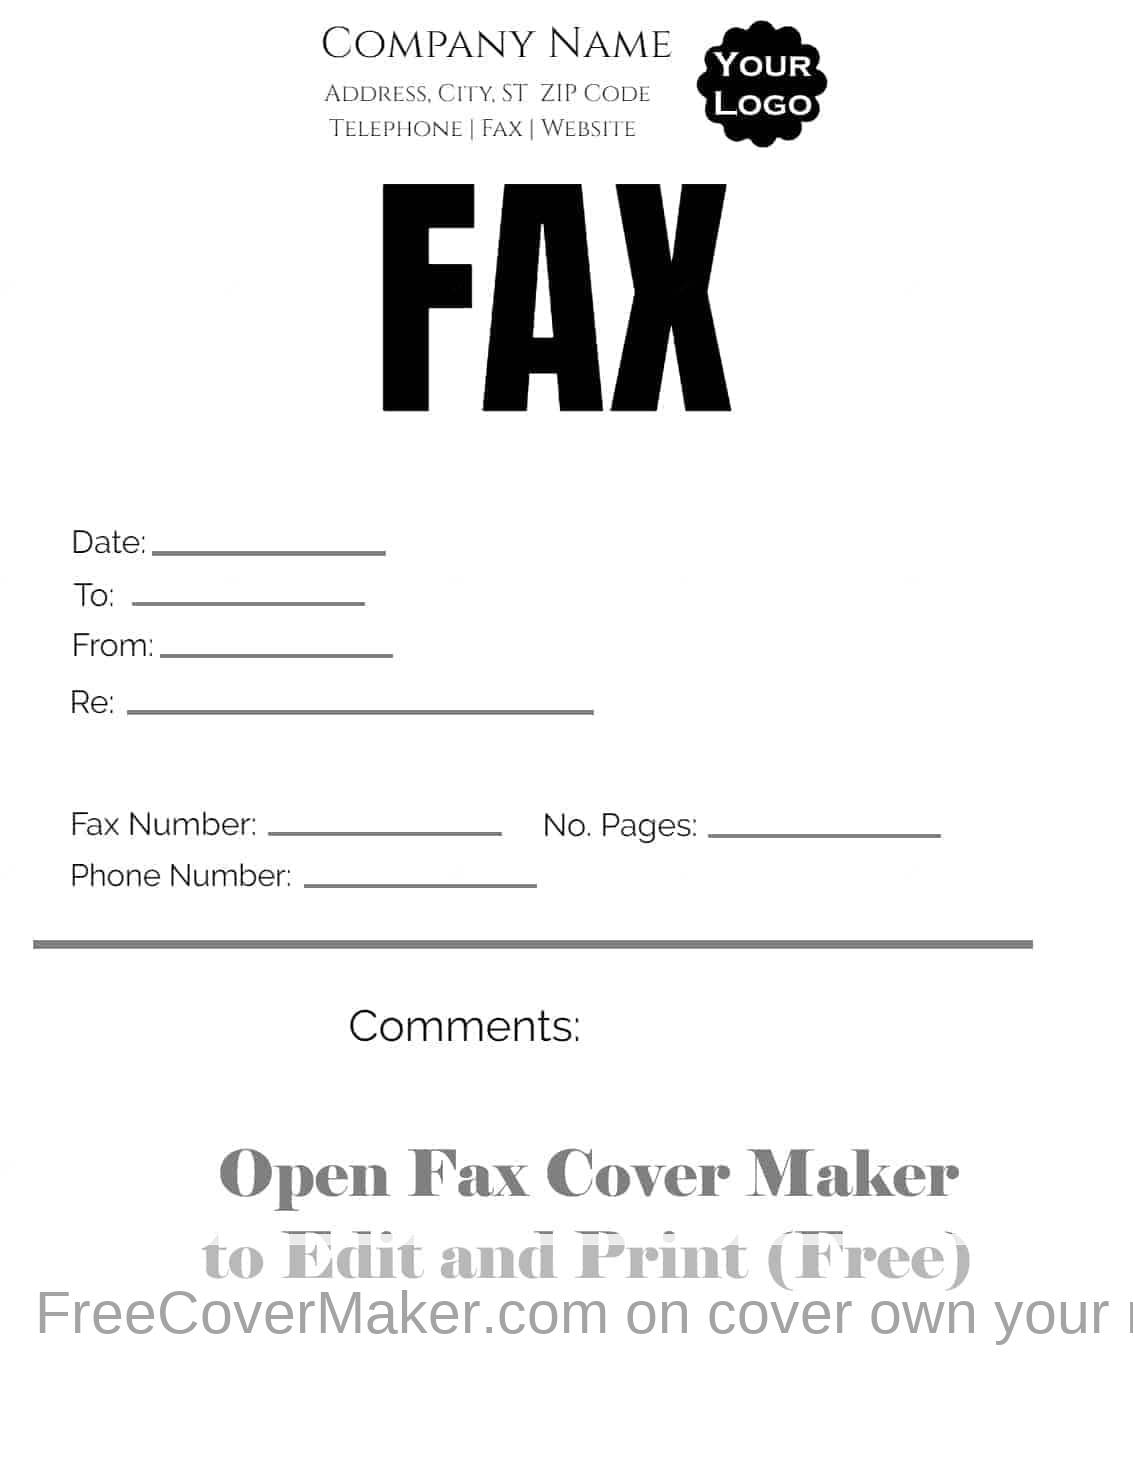 brother mfc 9330cdw custom cover sheet fax